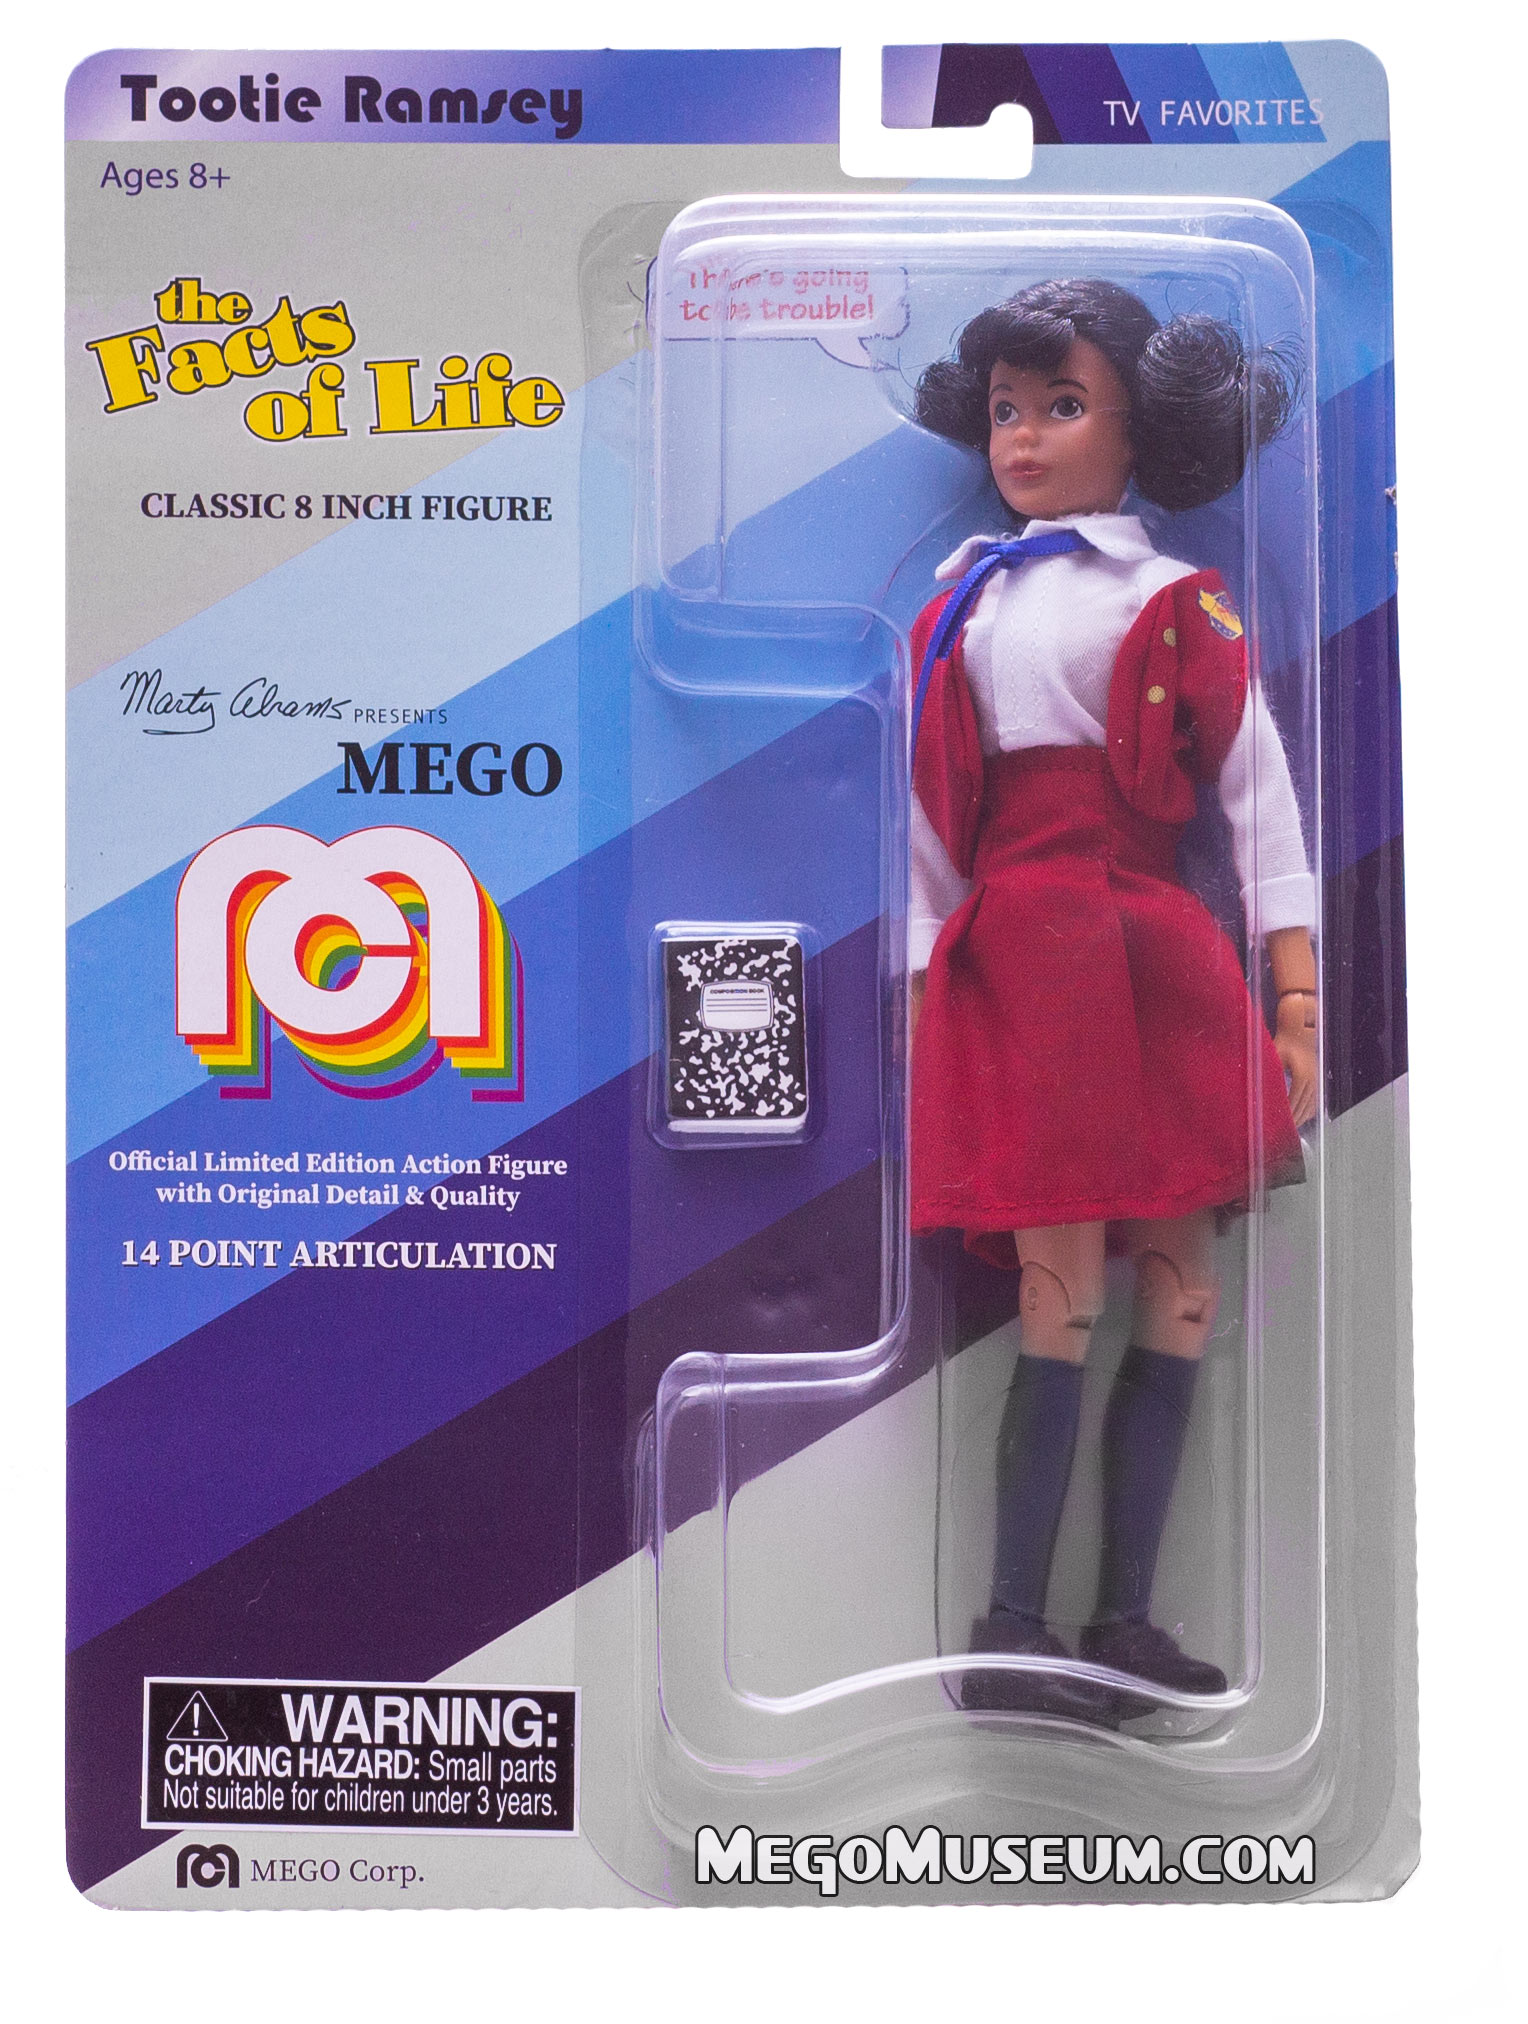 mego facts of life